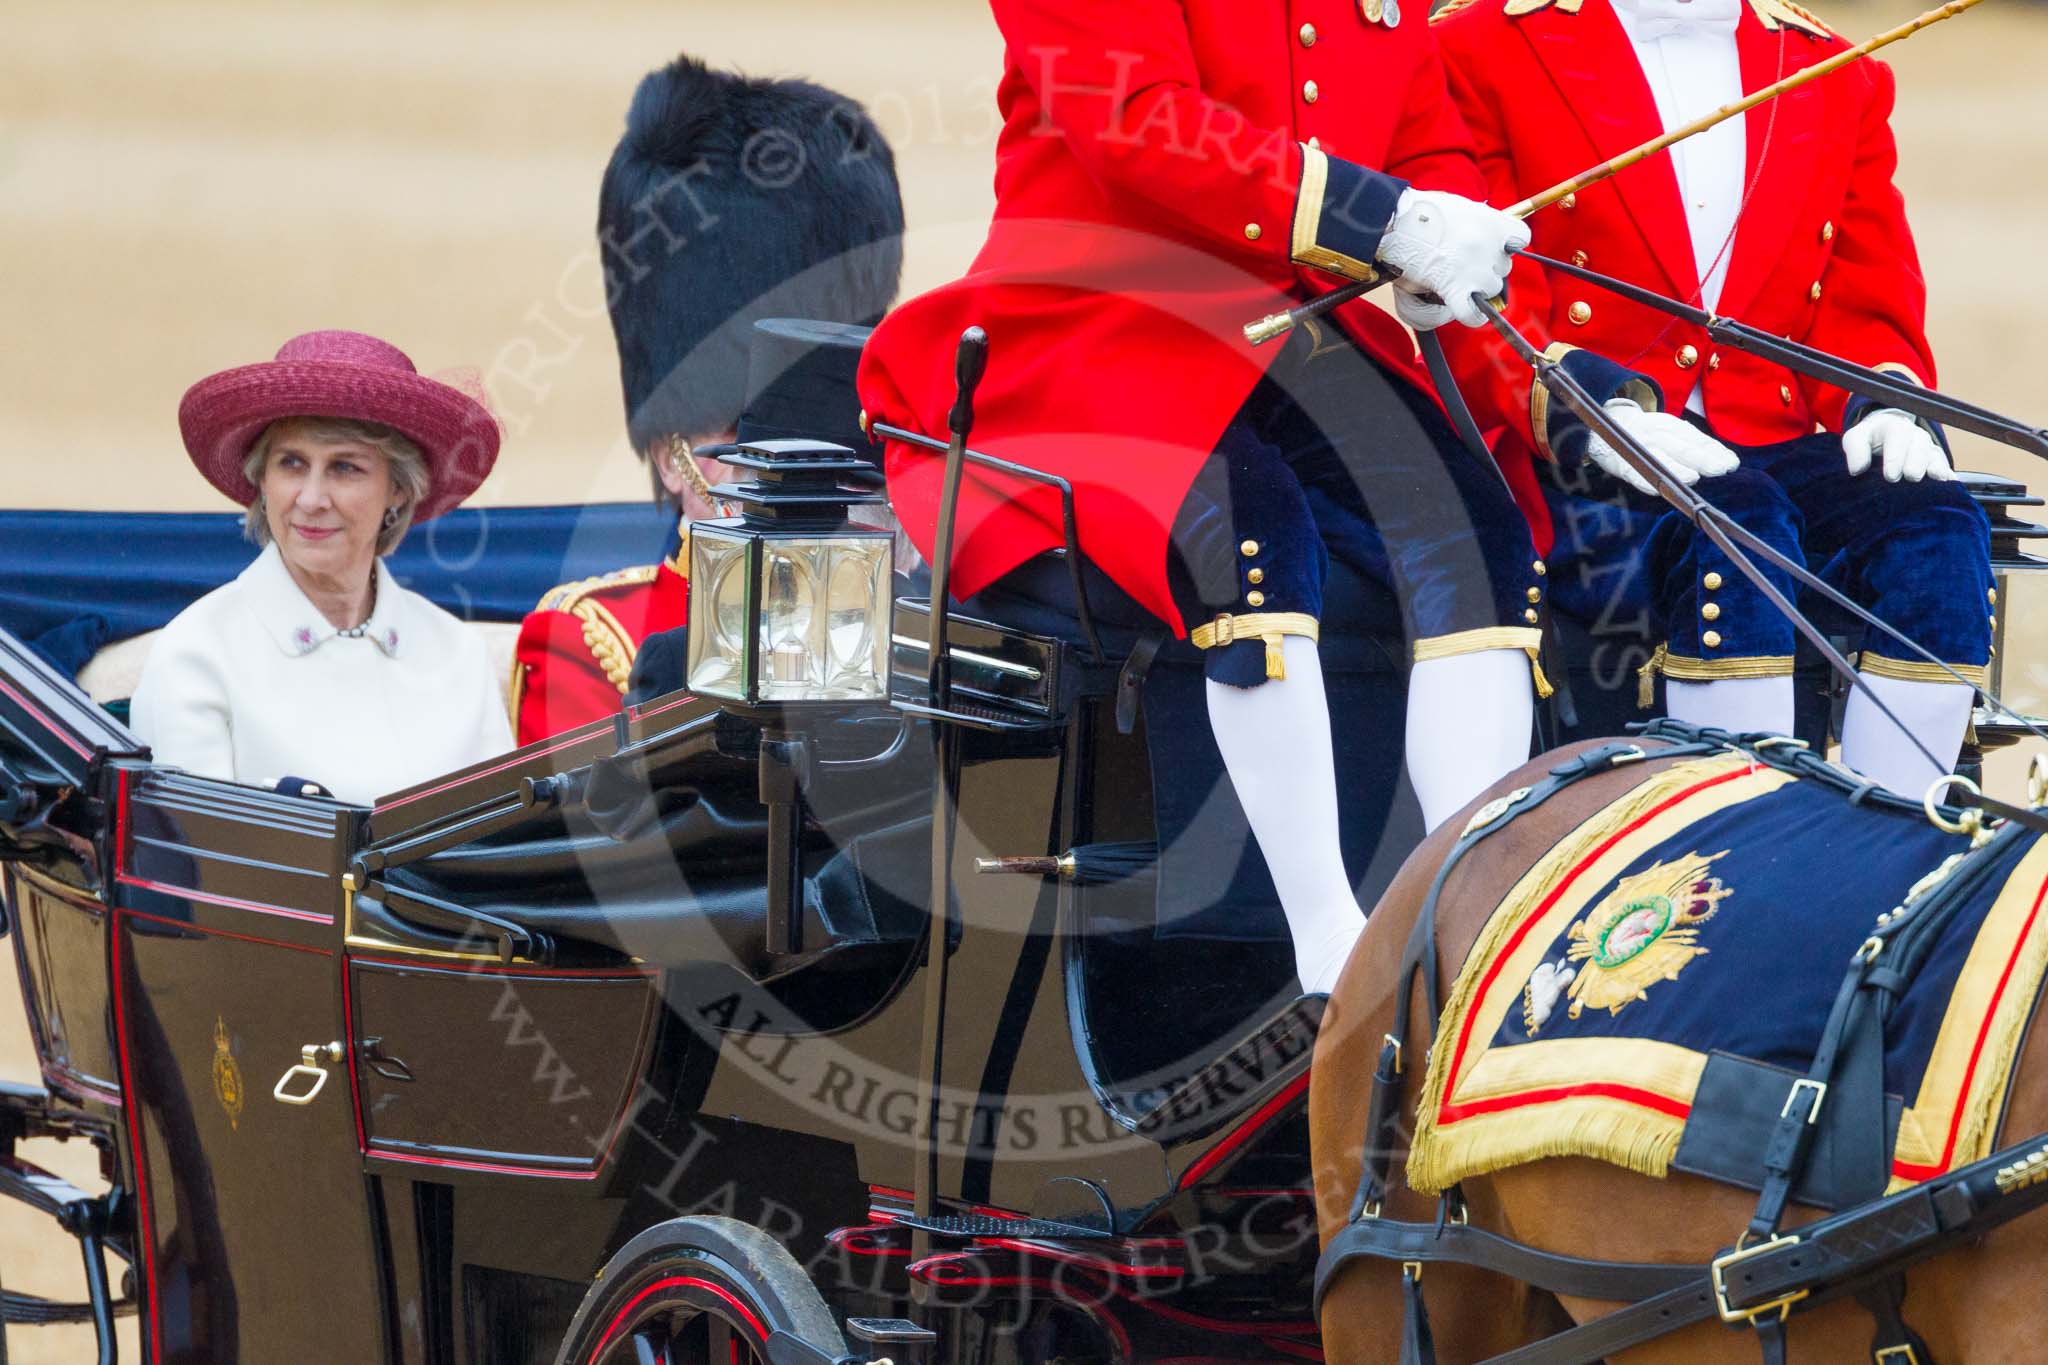 Trooping the Colour 2015. Image #192, 13 June 2015 10:51 Horse Guards Parade, London, UK